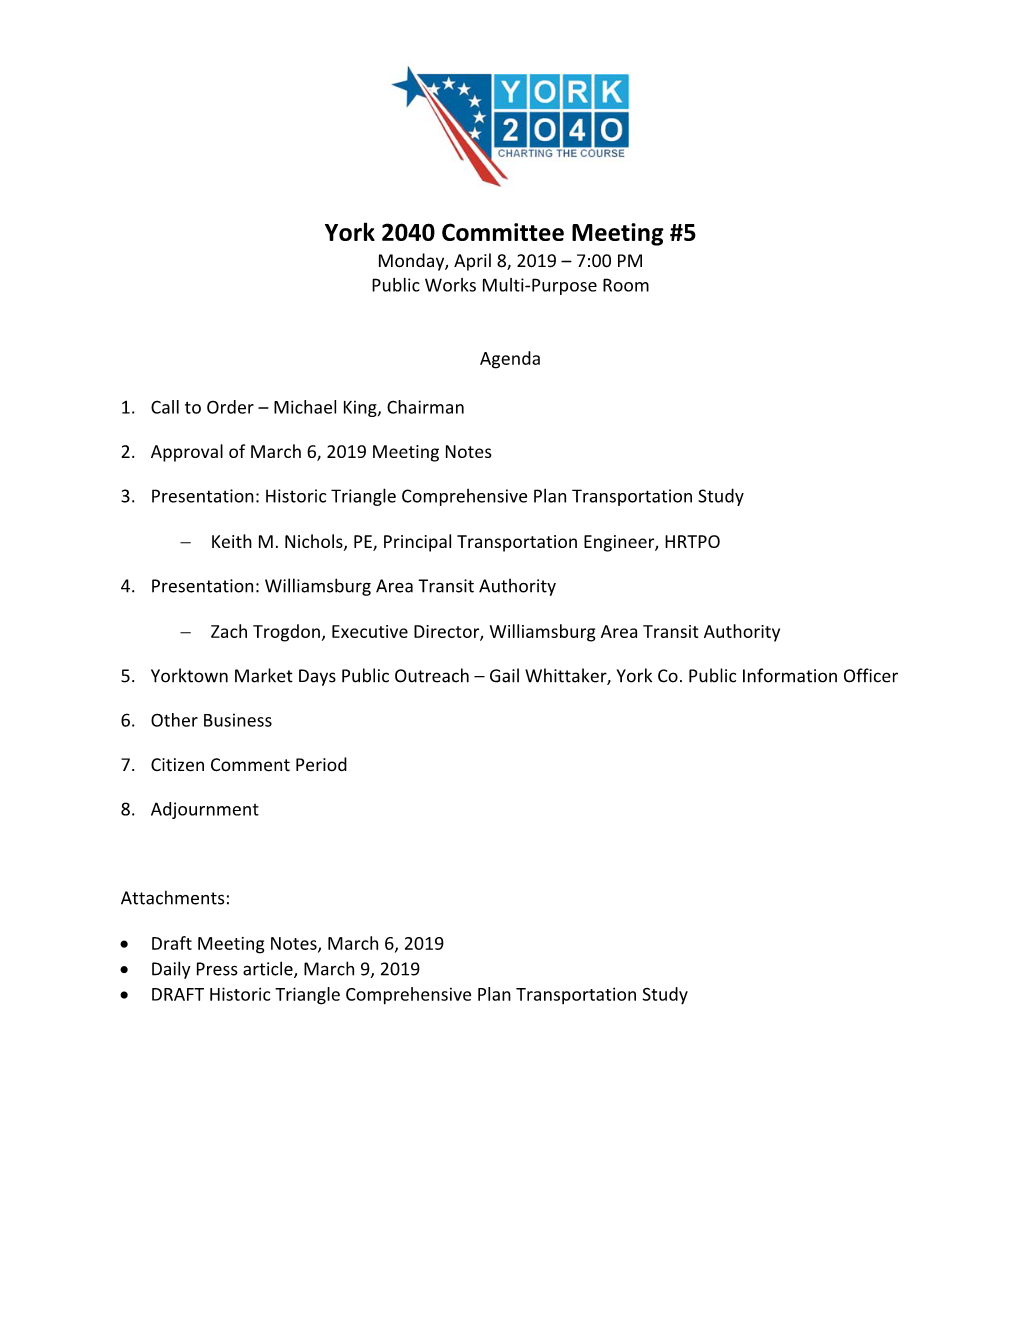 York 2040 Committee Meeting #5 Monday, April 8, 2019 – 7:00 PM Public Works Multi‐Purpose Room